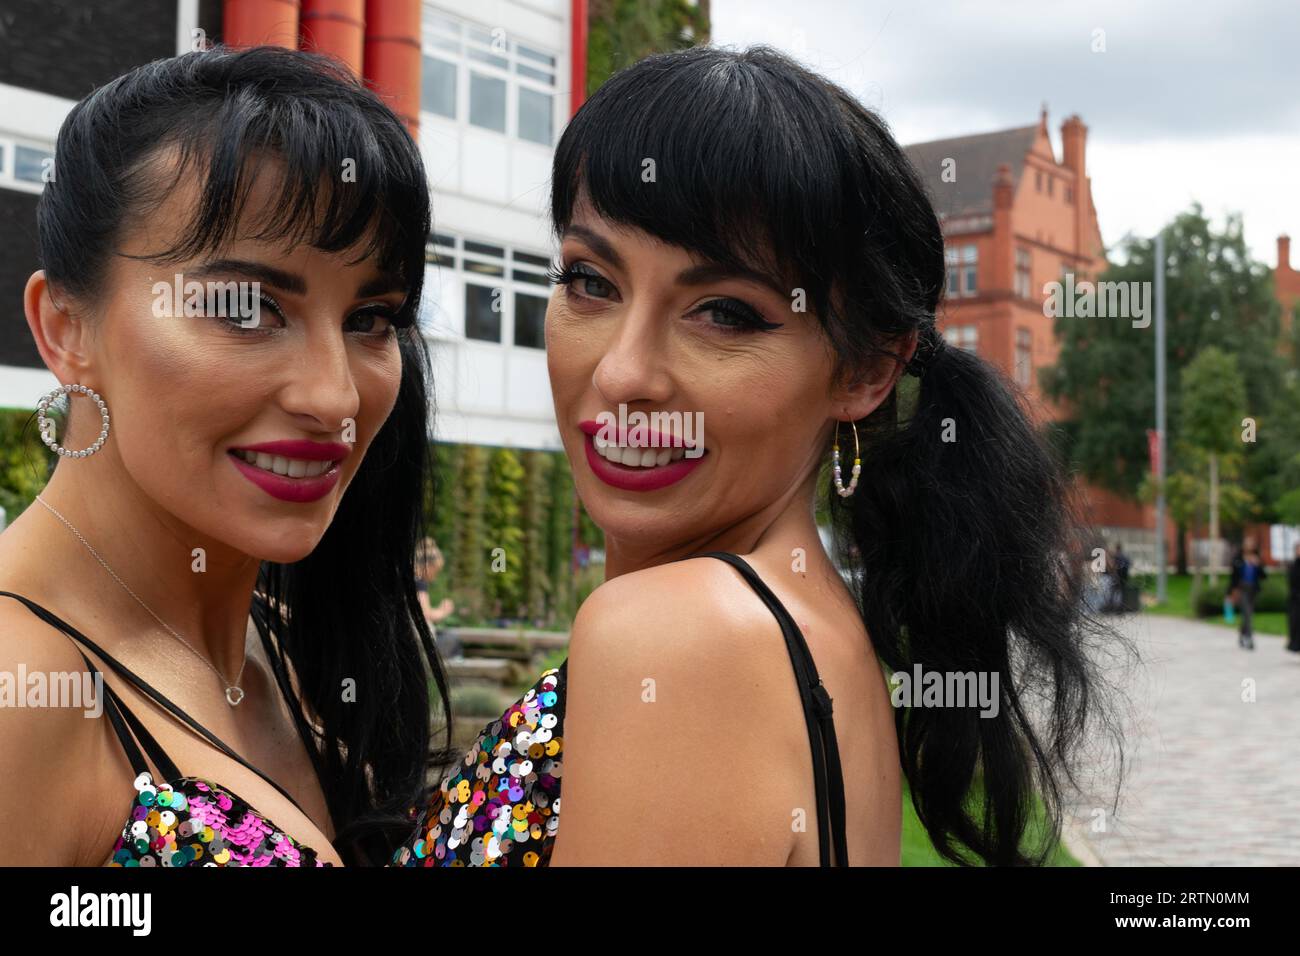 The Cheeky Girls duo at University of Salford freshers week. Greater Manchester UK Stock Photo